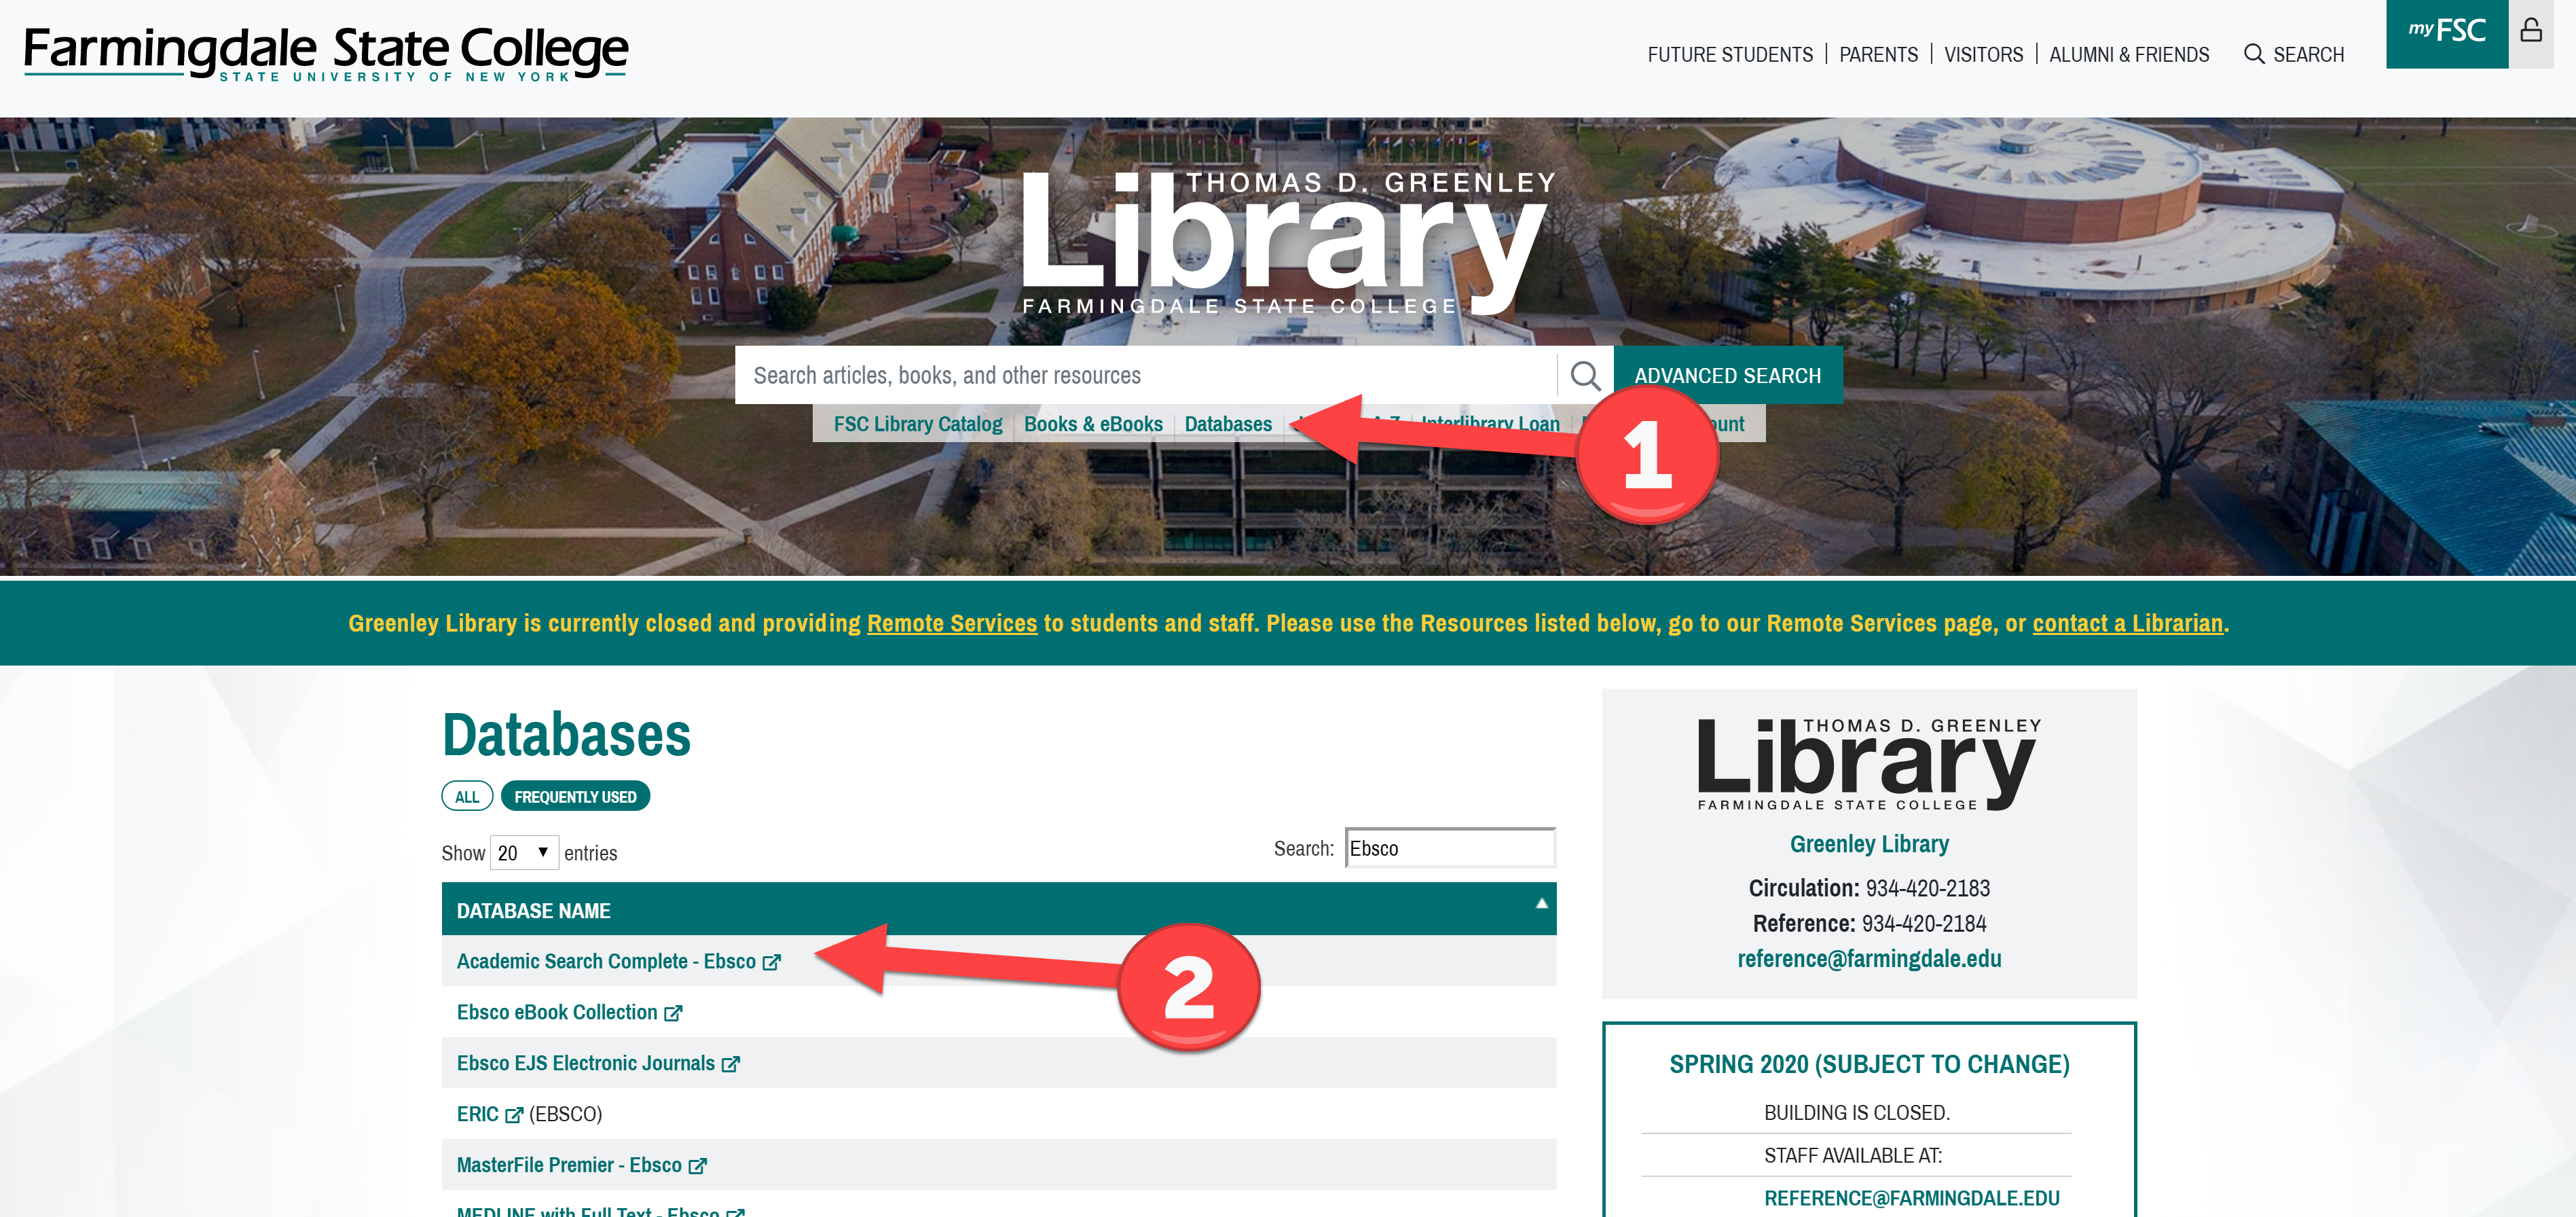 How to get to the database from the library homepage. 